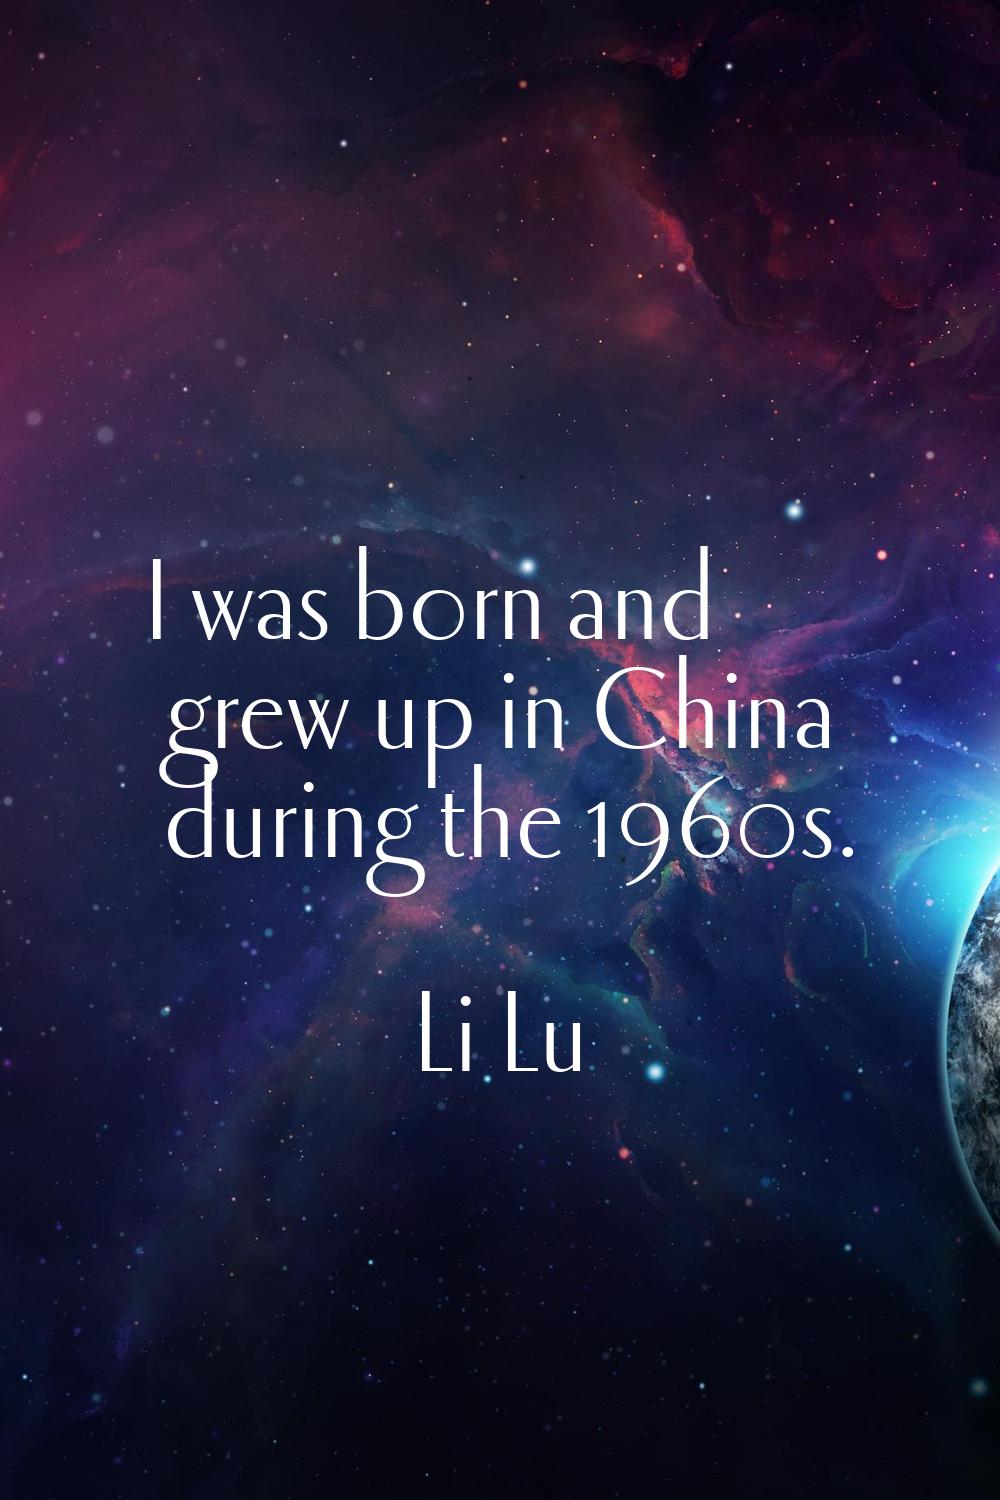 I was born and grew up in China during the 1960s.